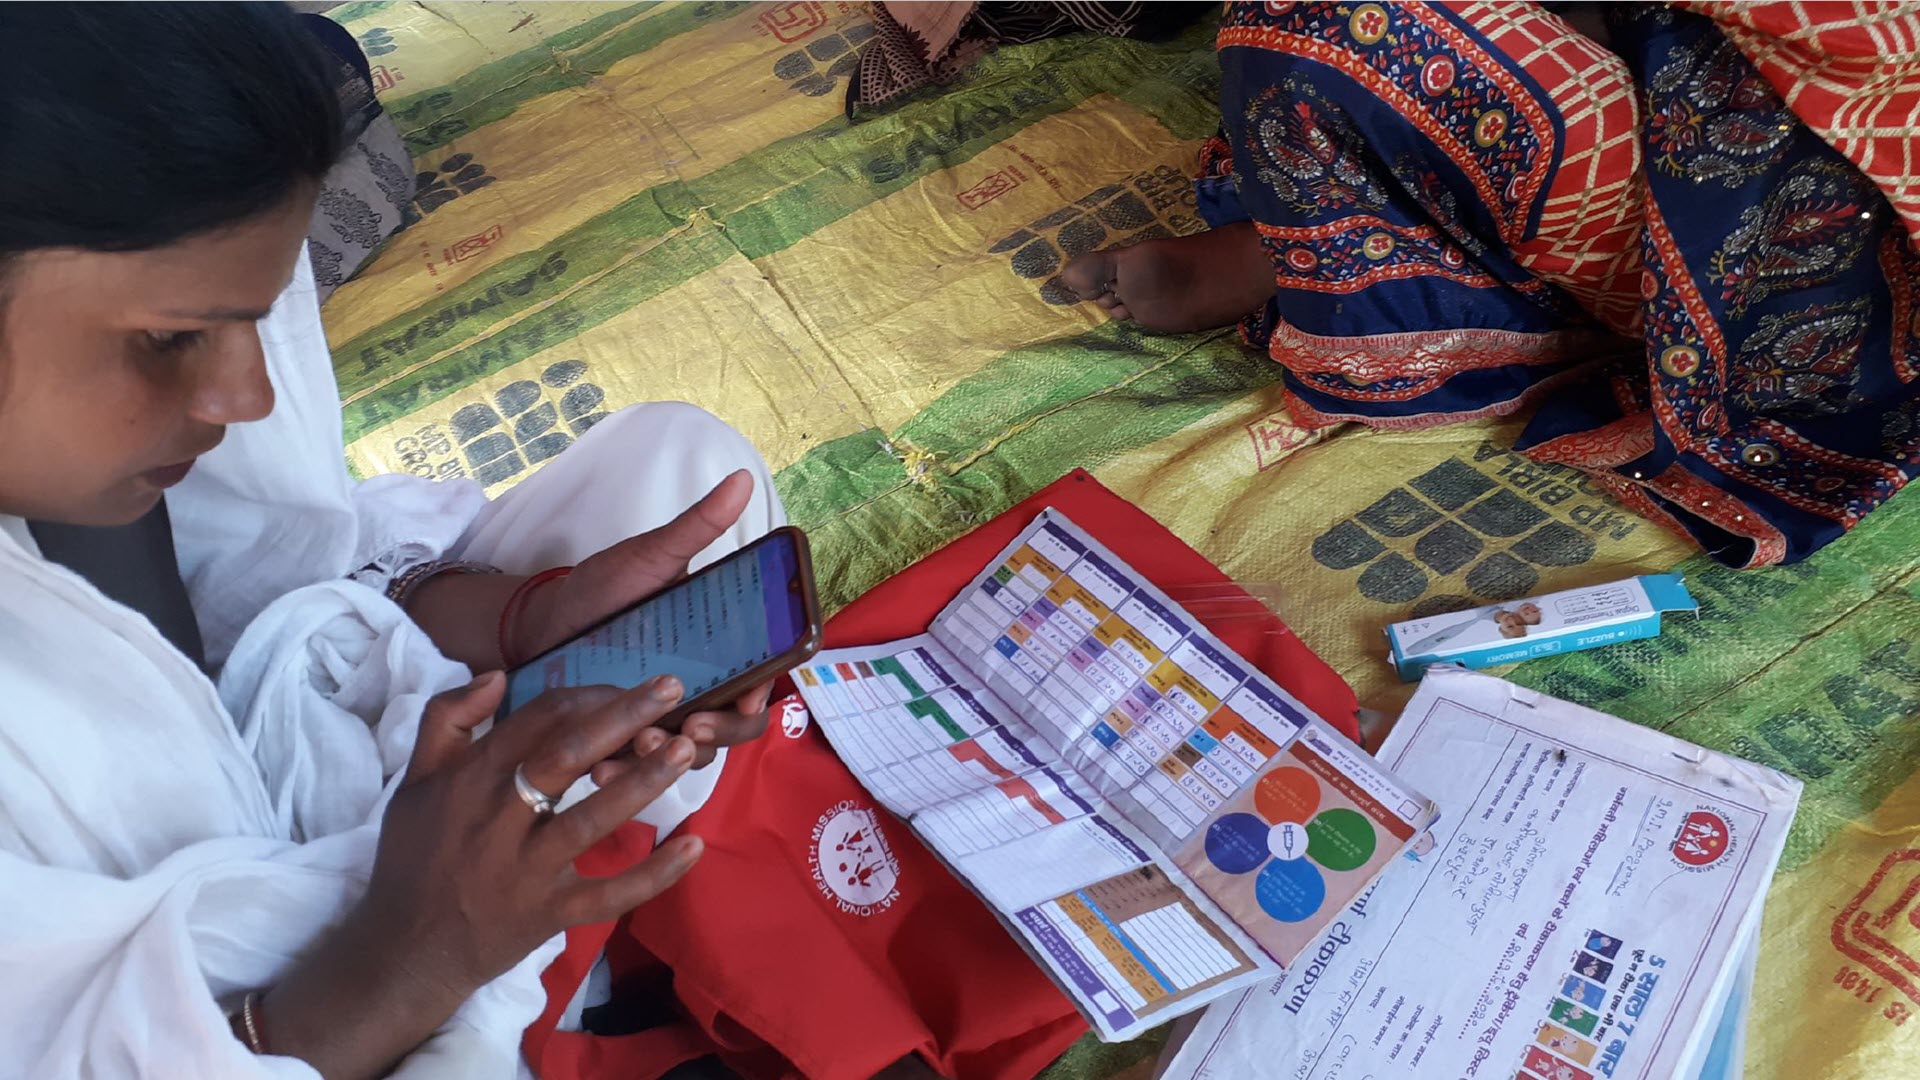 Health worker in a rural village in India using a mobile health education application